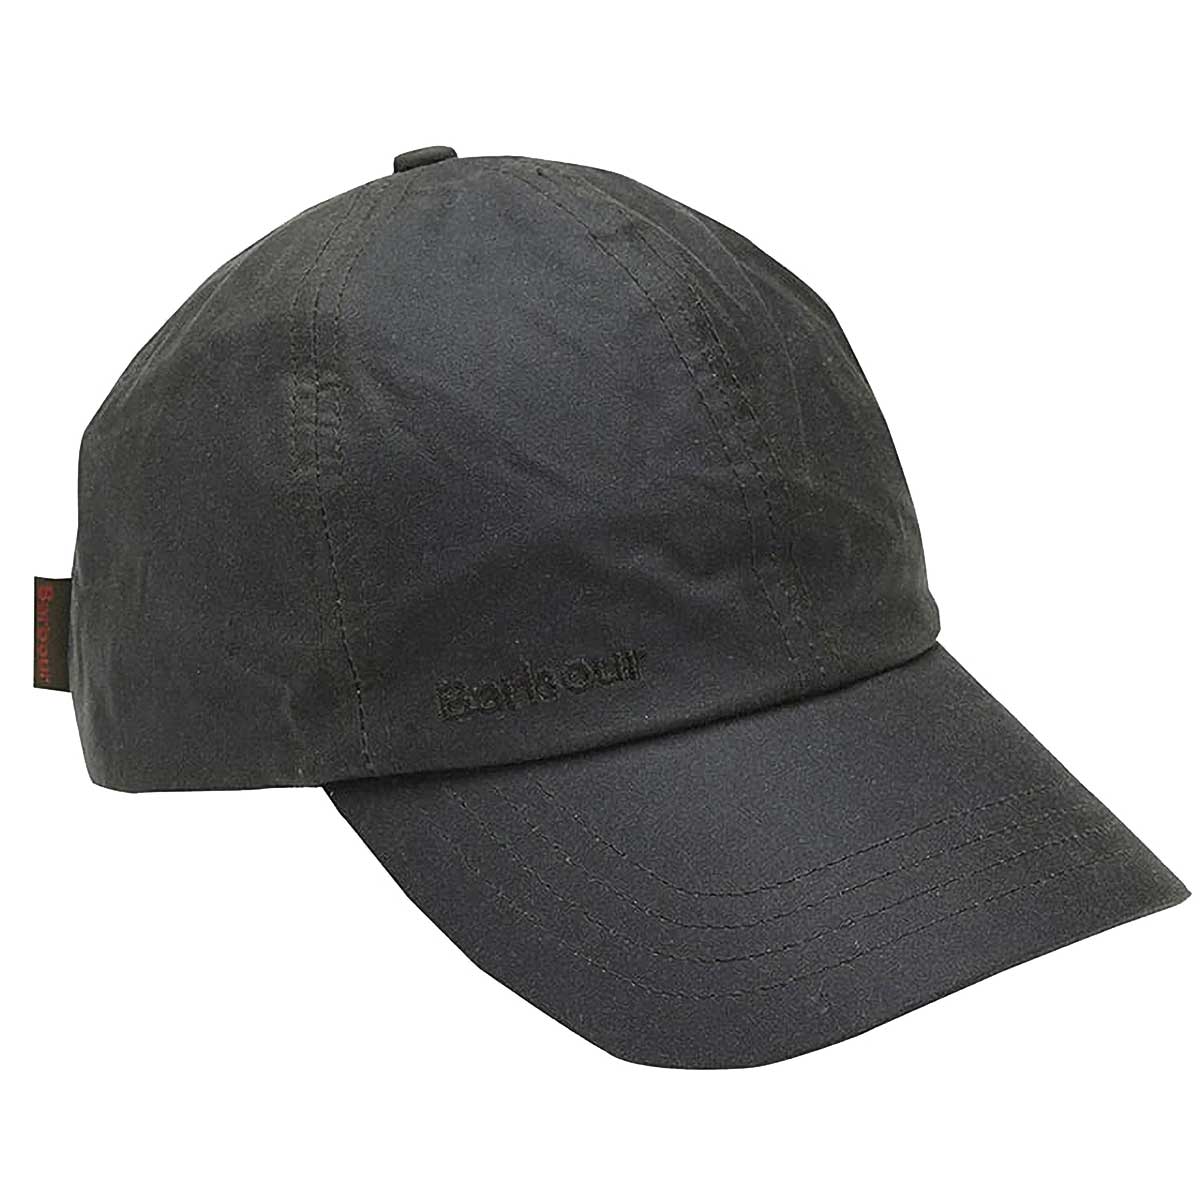 BARBOUR Waxed Sports Cap - Sage